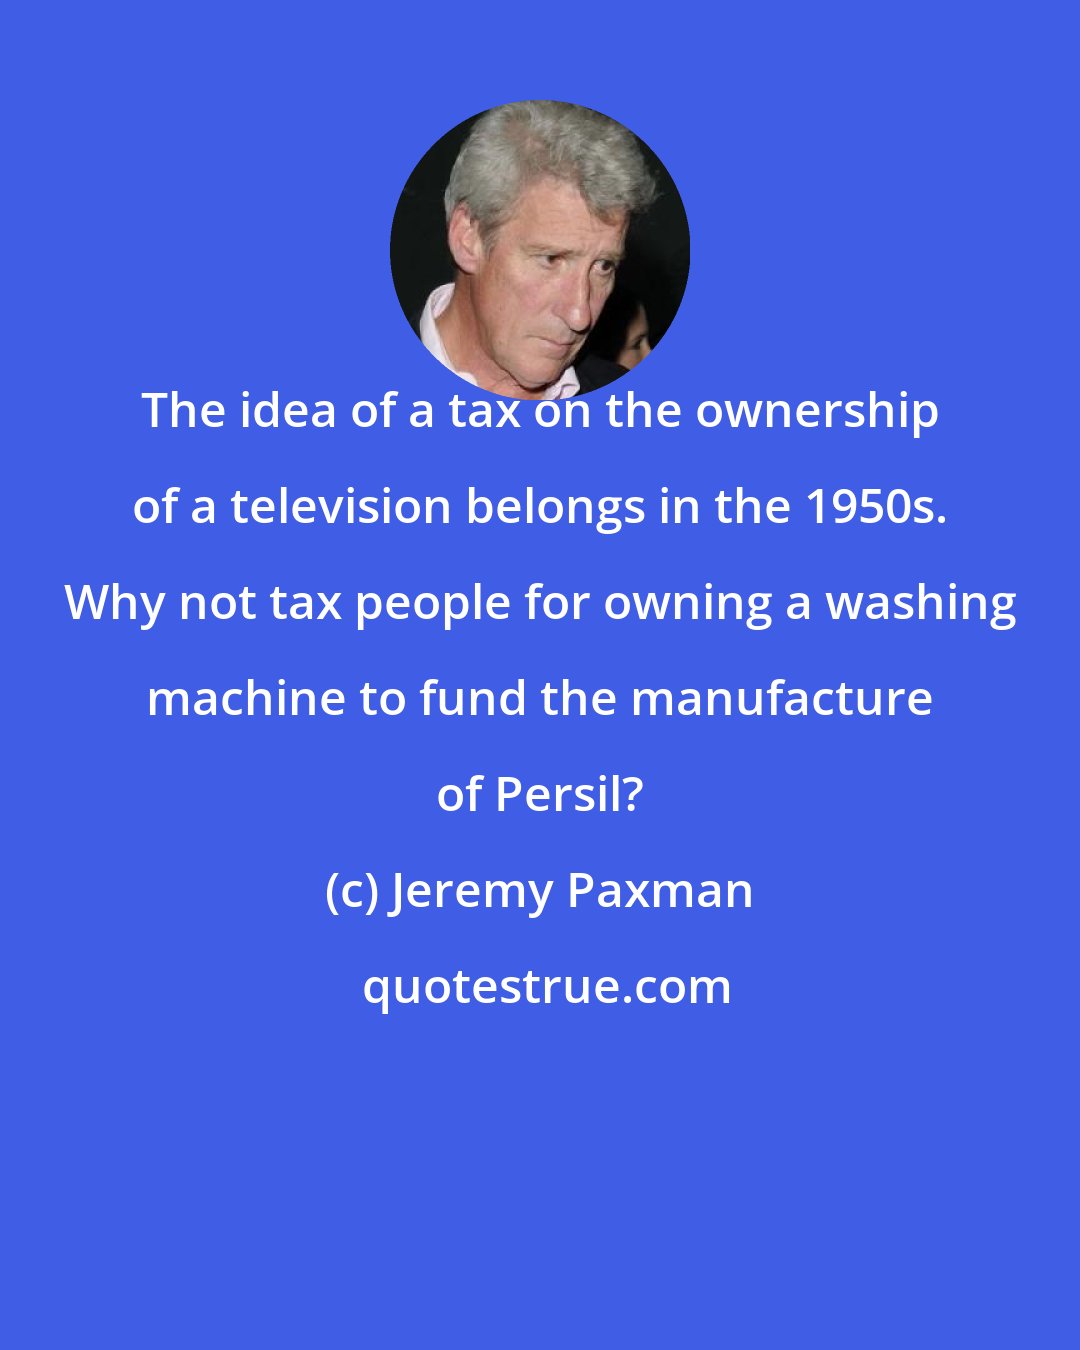 Jeremy Paxman: The idea of a tax on the ownership of a television belongs in the 1950s. Why not tax people for owning a washing machine to fund the manufacture of Persil?